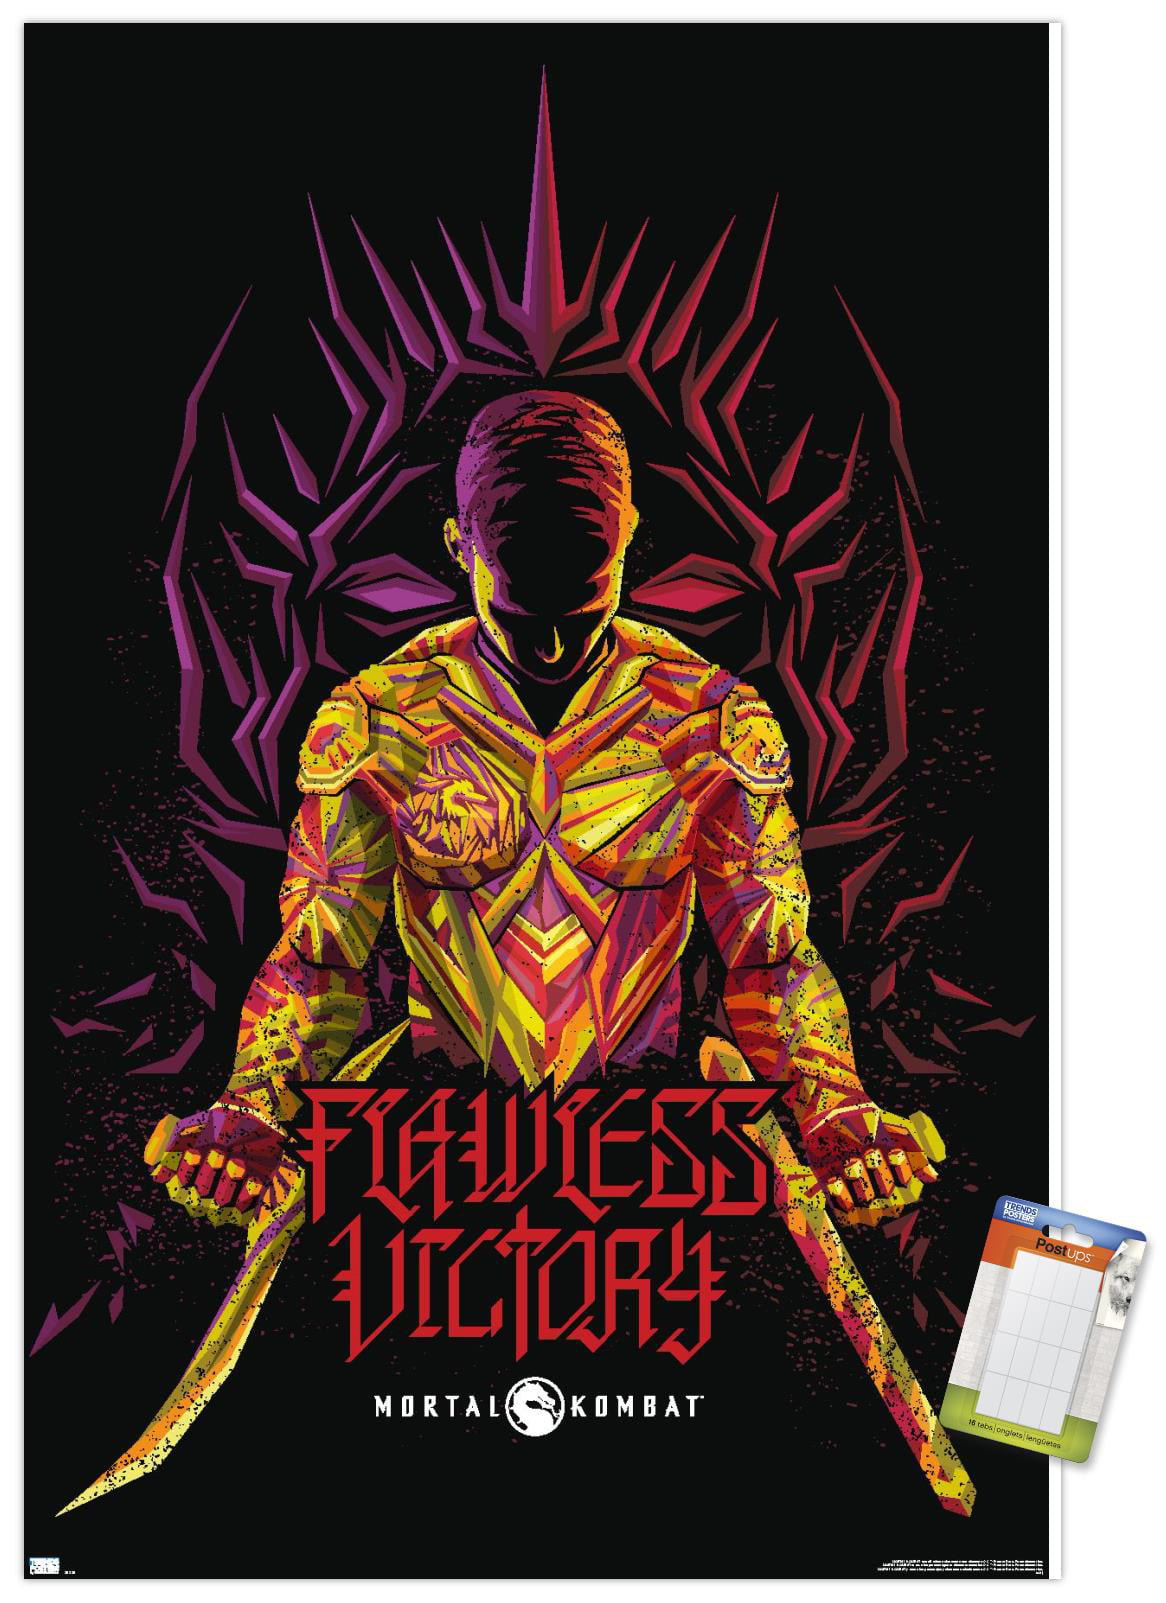 Flawless Victory Posters for Sale